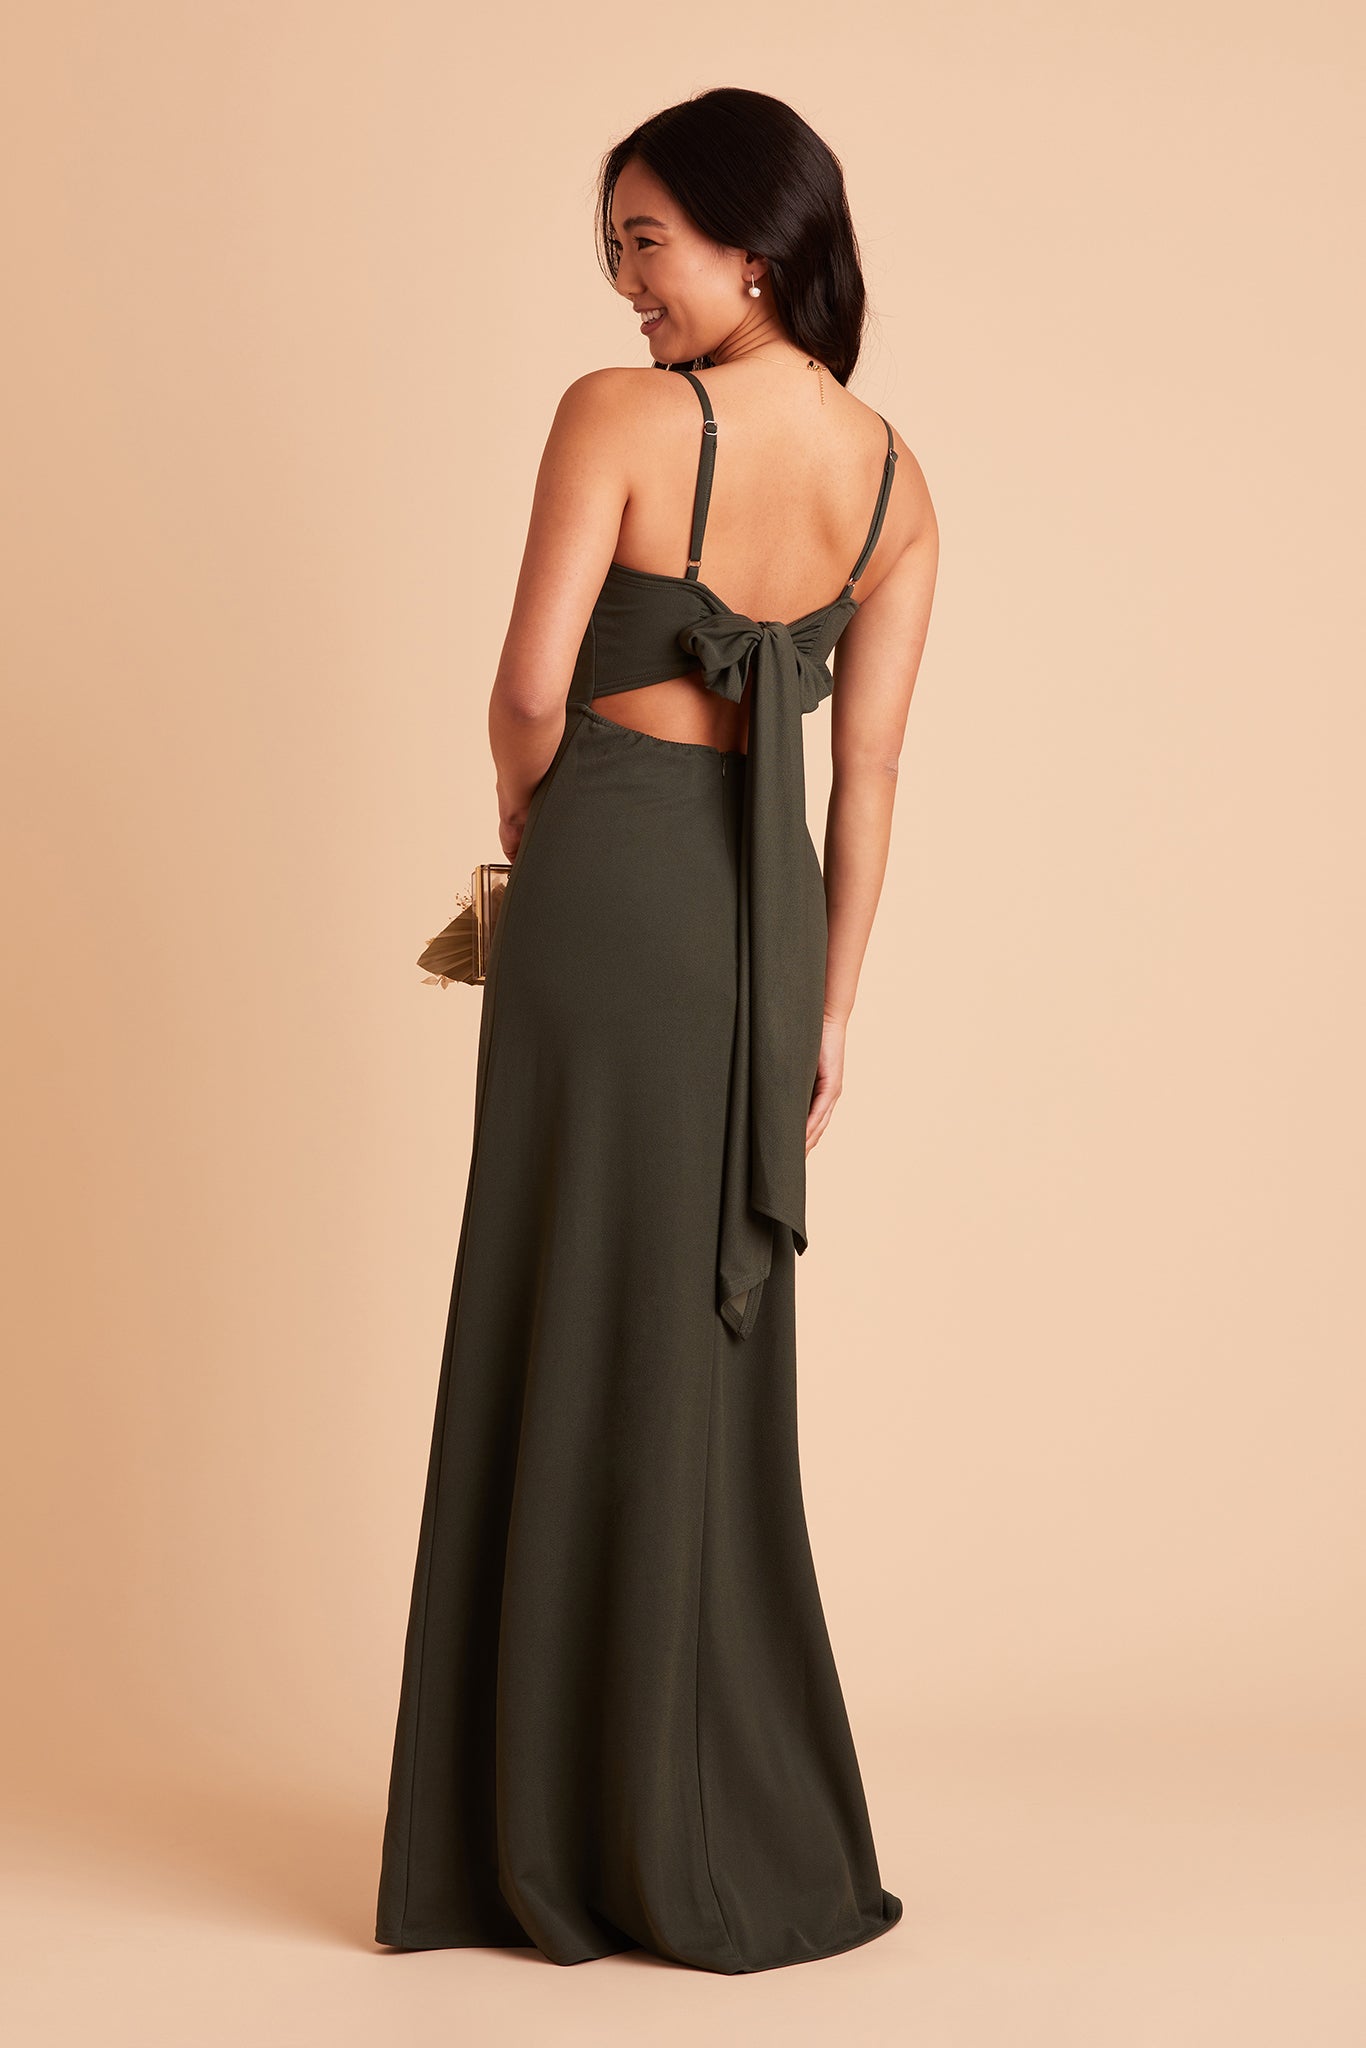 Benny bridesmaid dress in olive crepe by Birdy Grey, back view